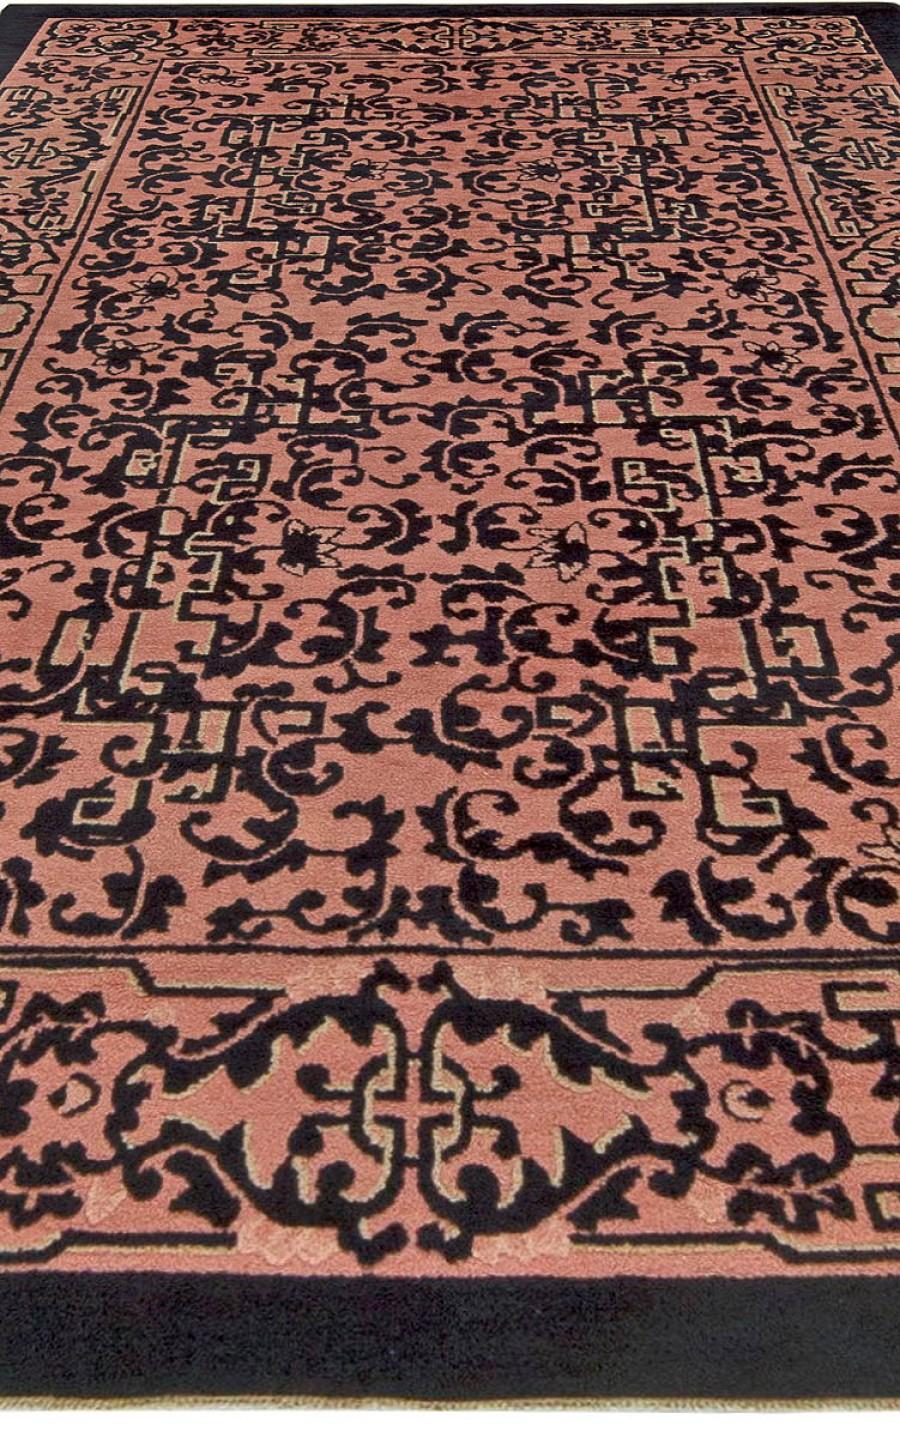 Authentic Early 20th century Chinese black and pale pink wool rug
Size: 5'0